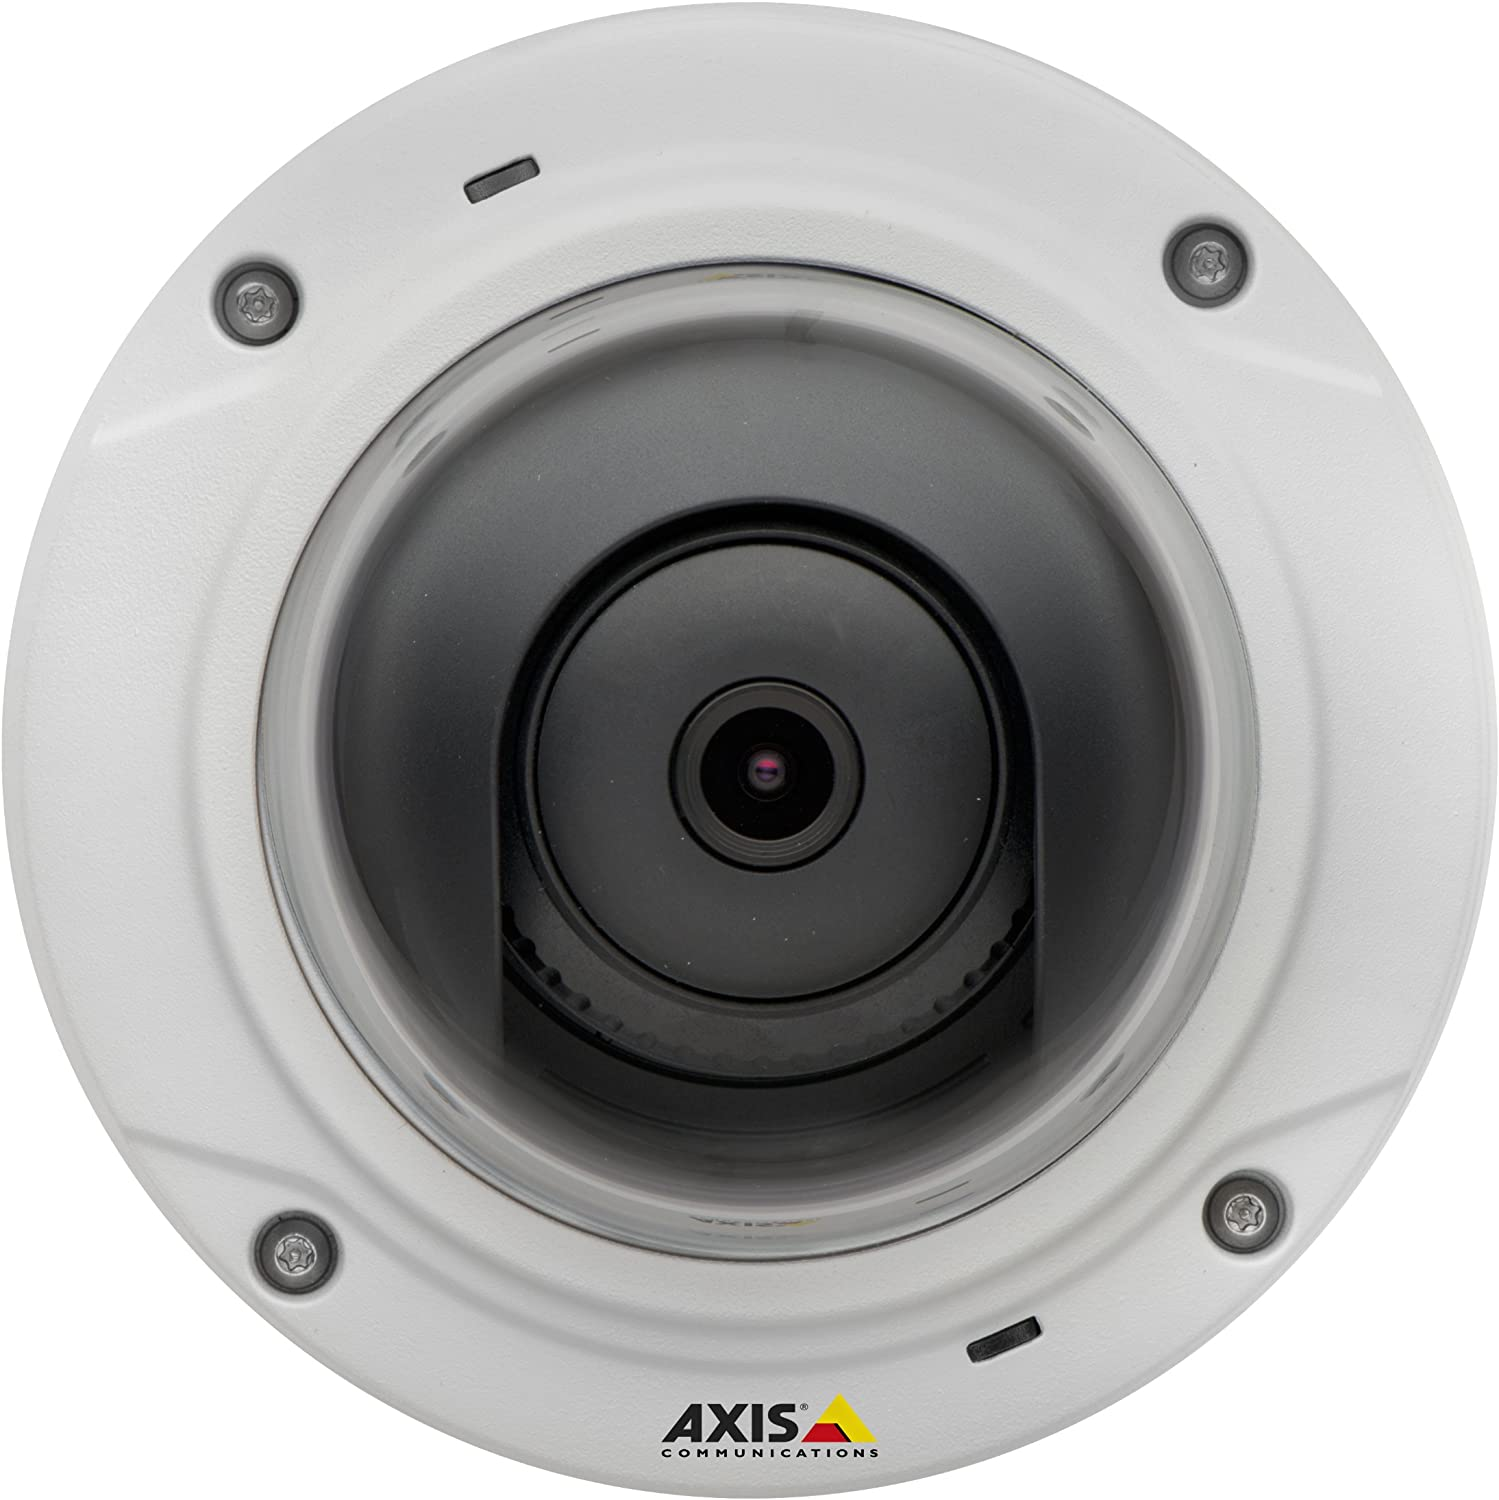 AXIS M3026-VE Network Camera 